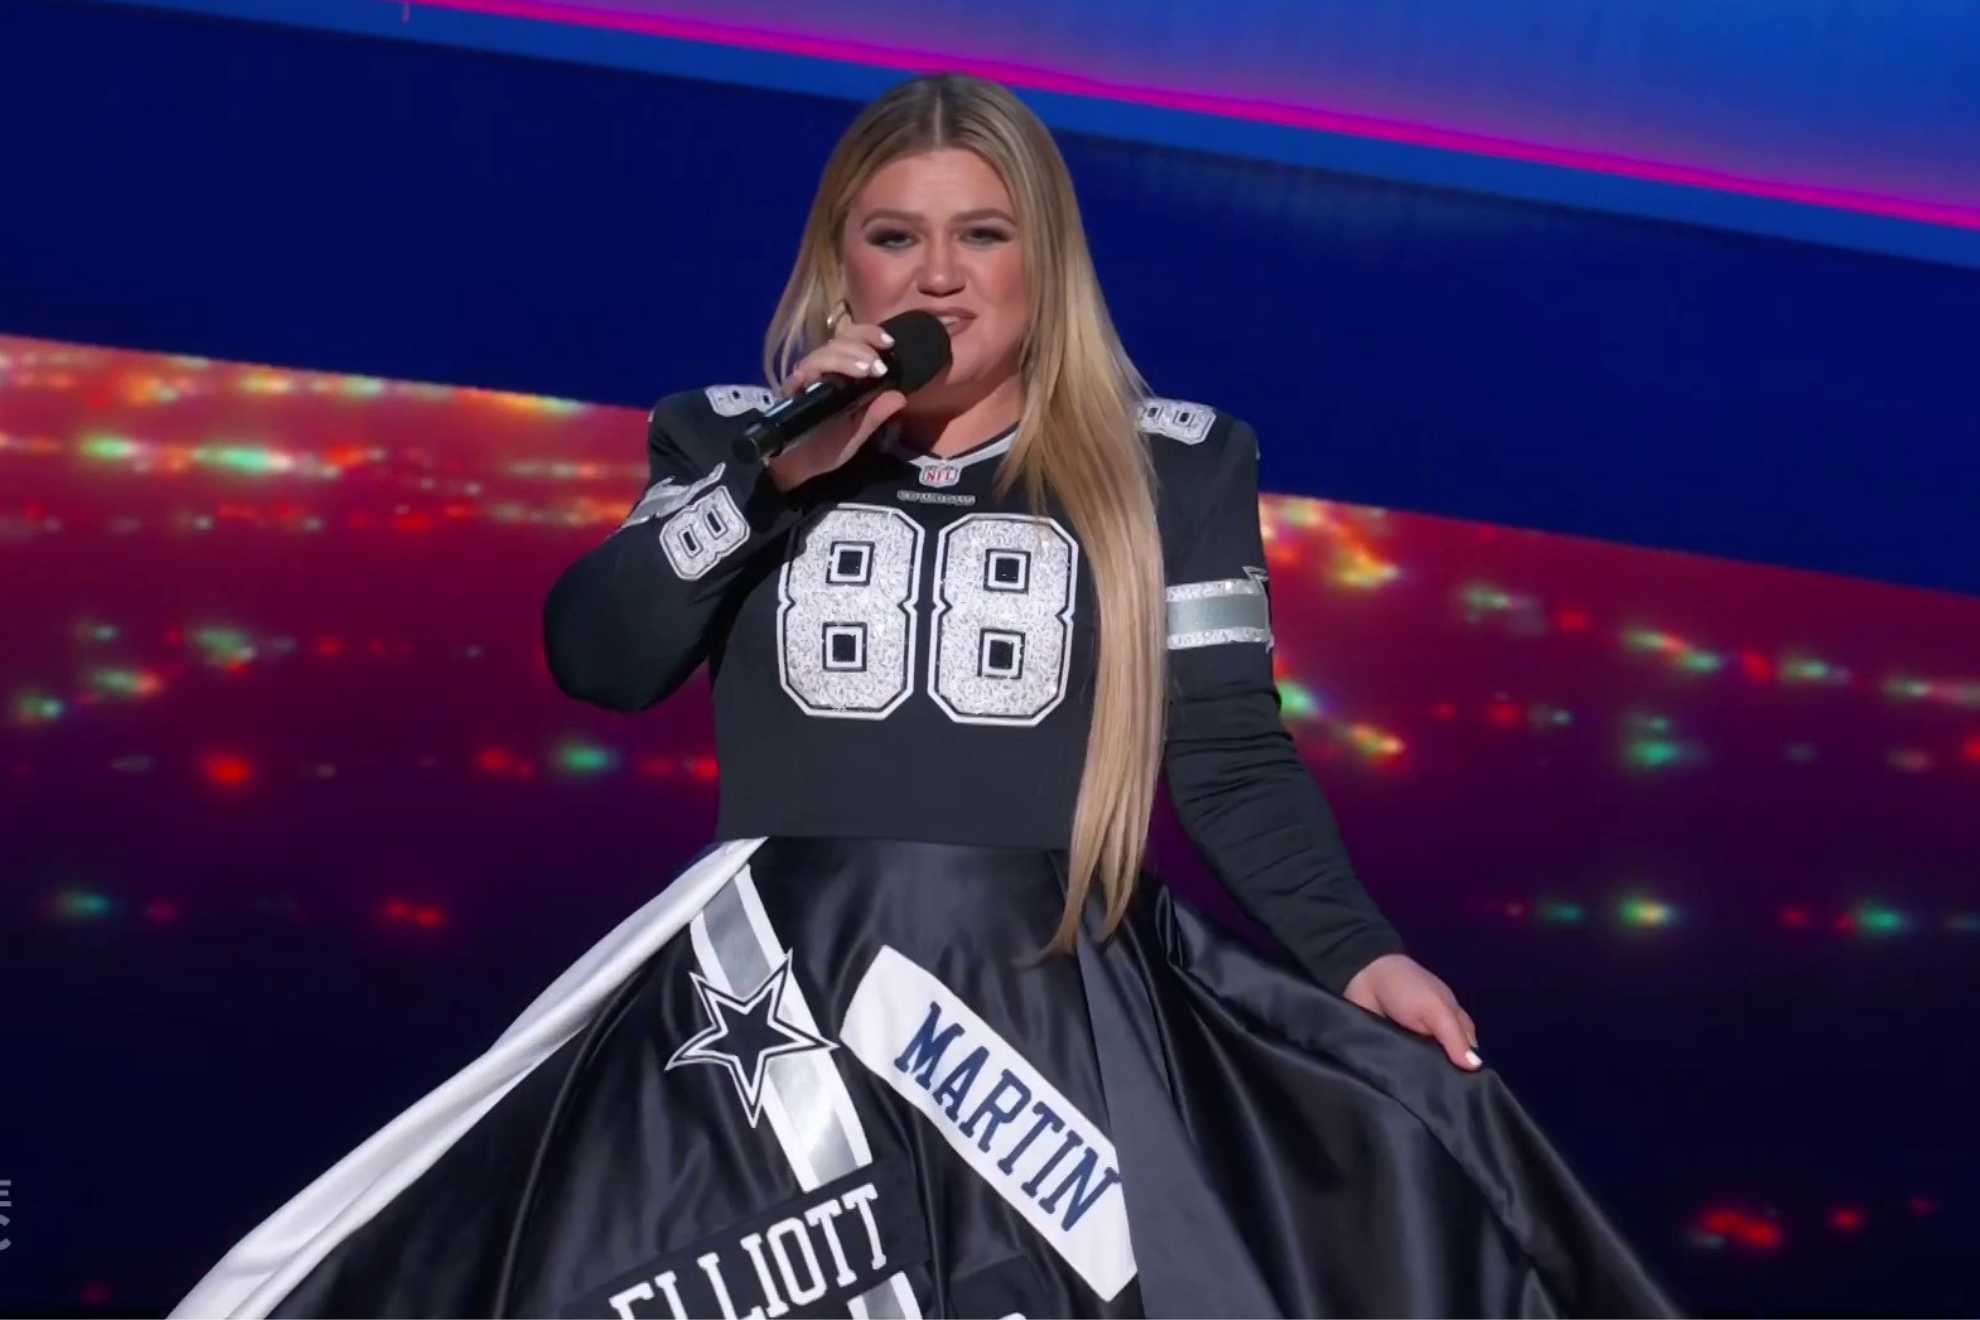 Kelly Clarkson Wears Incredible Dallas Cowboys Dress While Hosting